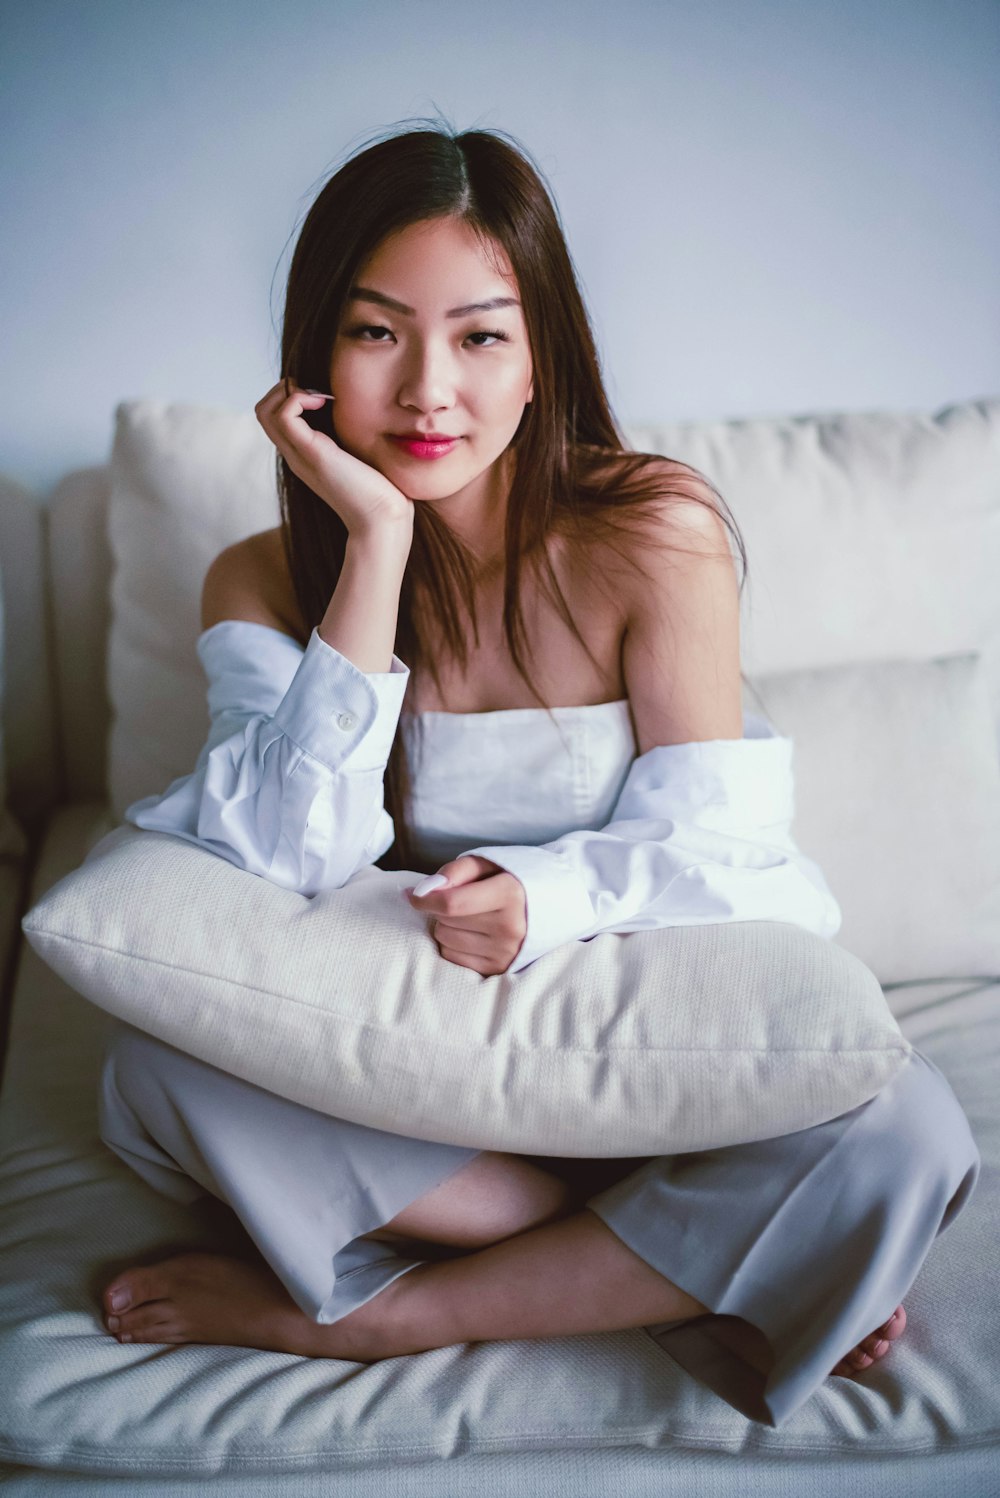 woman in white dress sitting on white couch